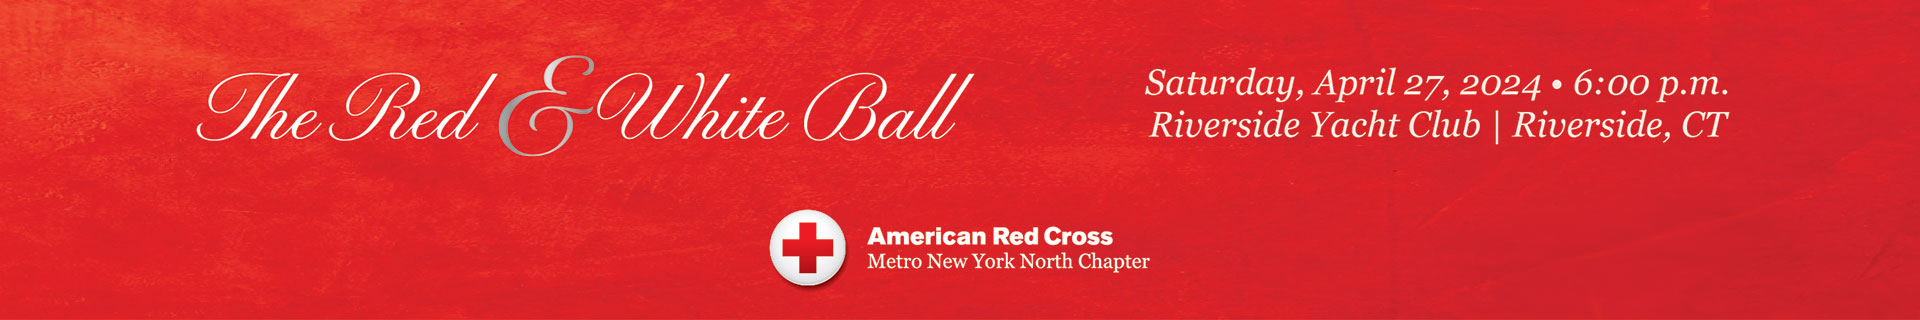 The 2024 Red & White Ball event banner with red background and event details